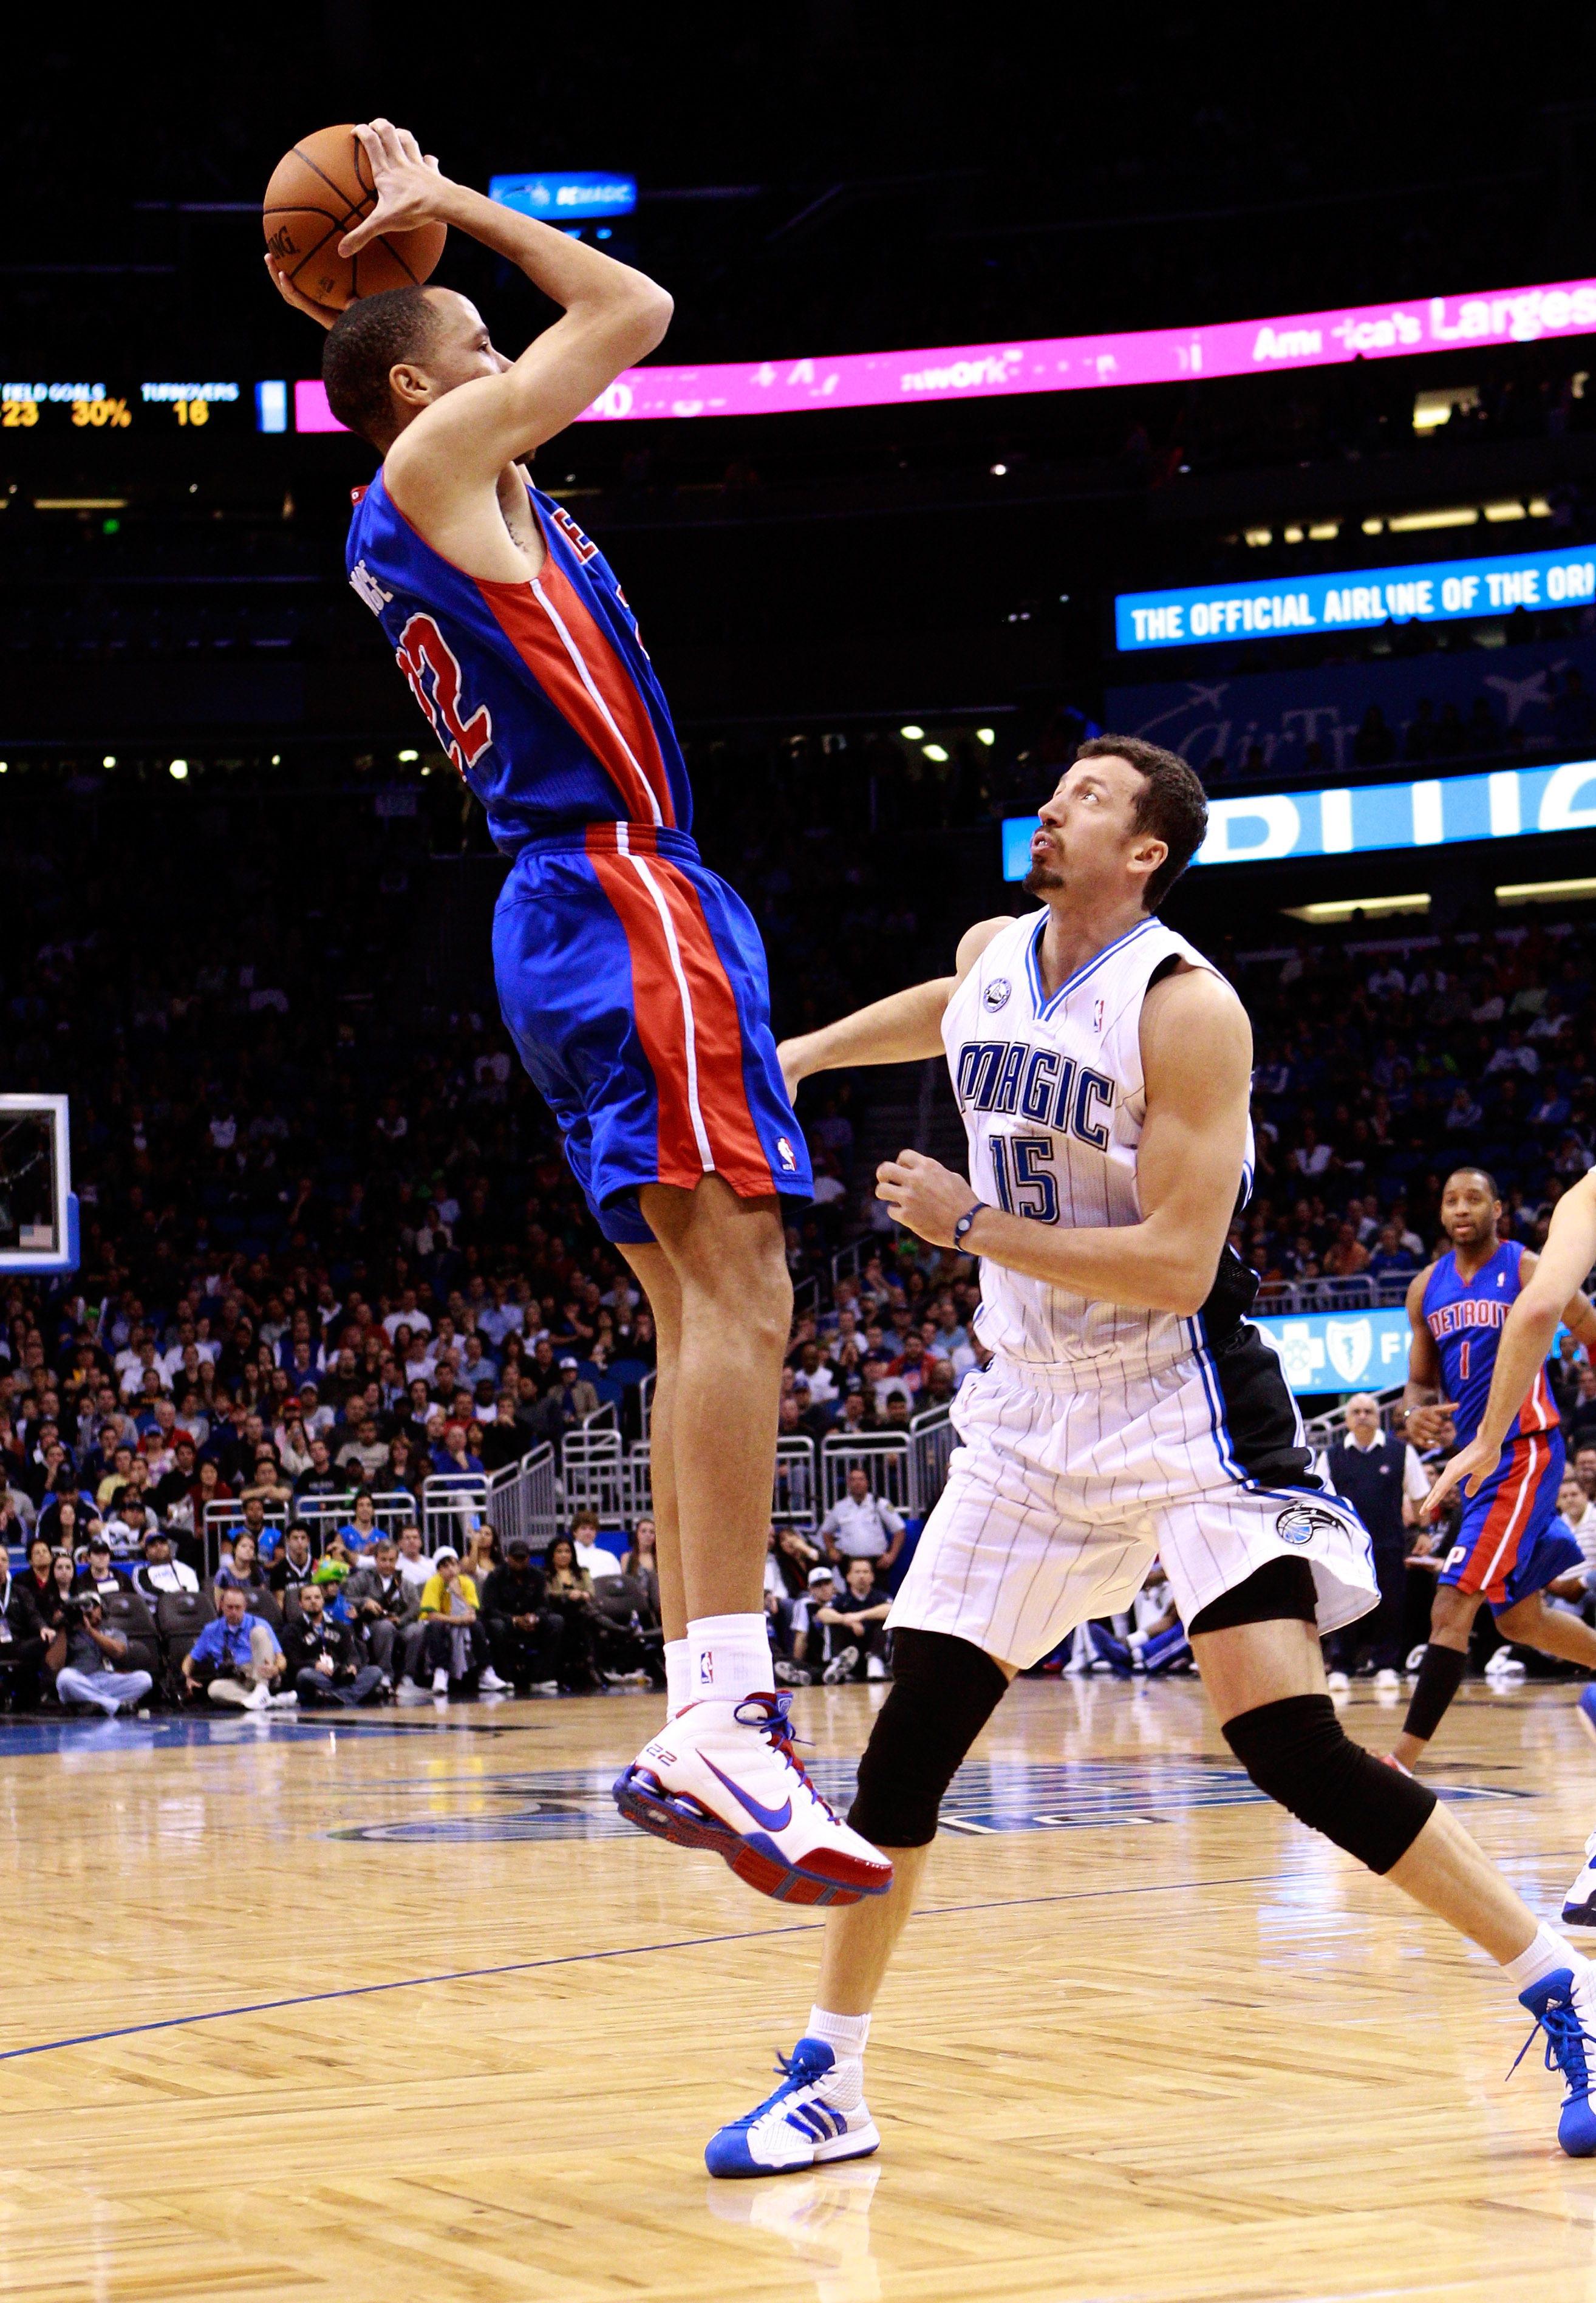 ORLANDO, FL - JANUARY 24:  Tayshaun Prince #22 of the Detroit Pistons attempts a shot over Hedo Turkoglu #15 of the Orlando Magic during the game at Amway Arena on January 24, 2011 in Orlando, Florida.  NOTE TO USER: User expressly acknowledges and agrees